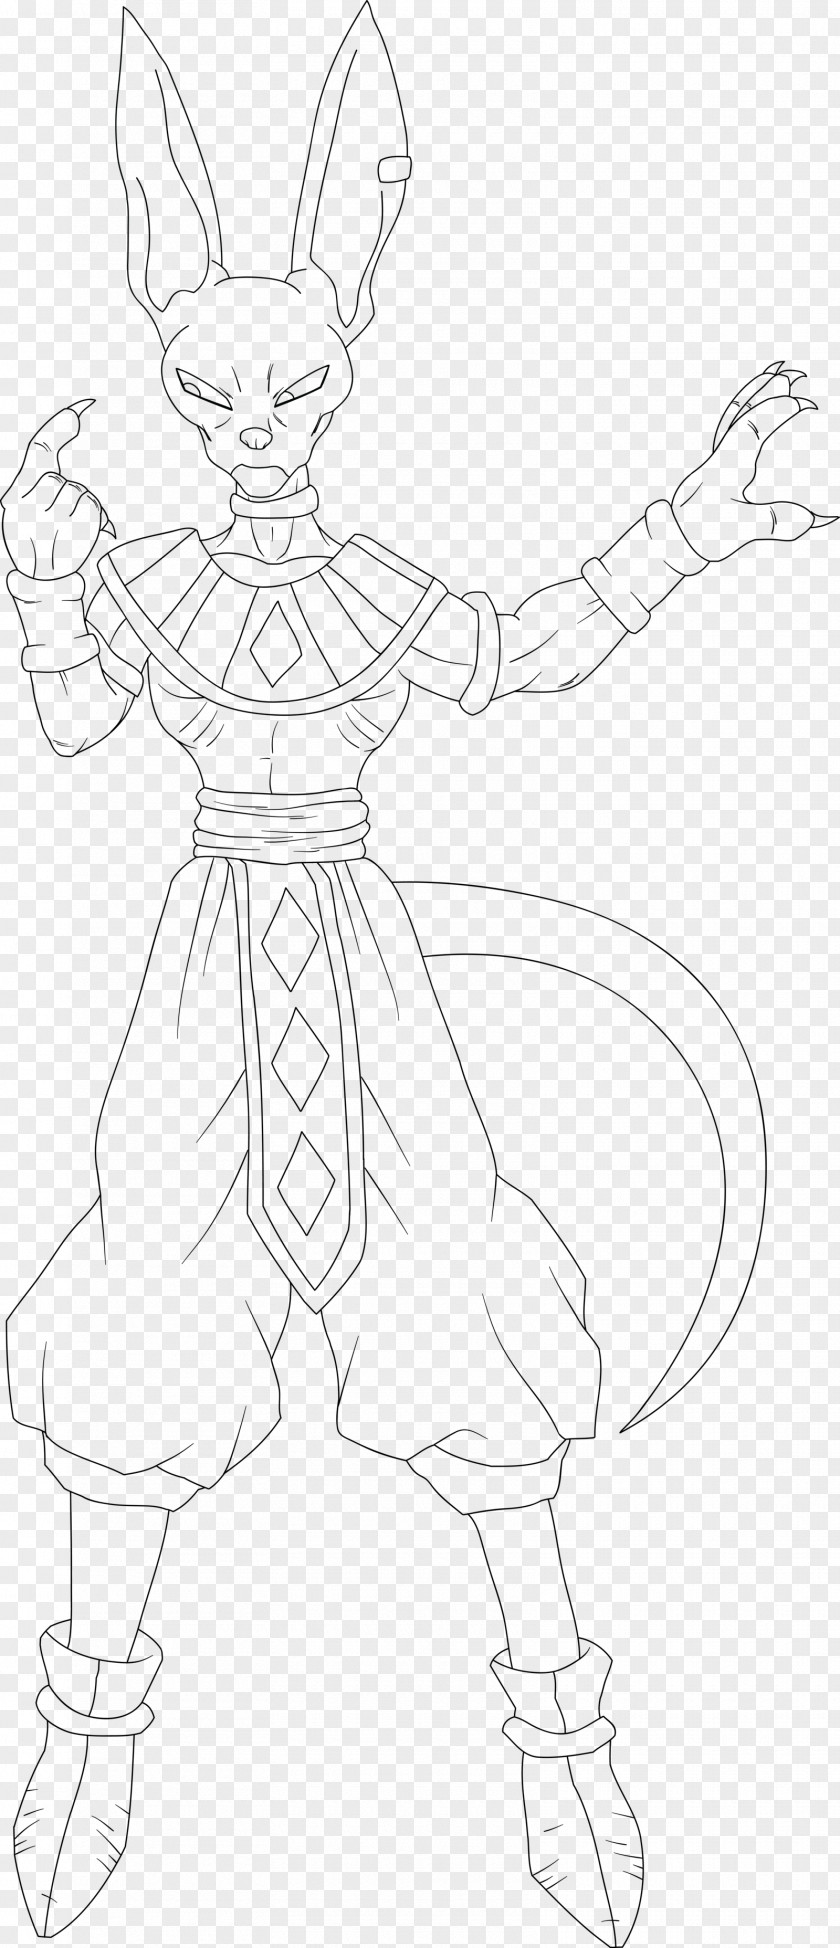 Powerfull Line Art White Cartoon Character Sketch PNG